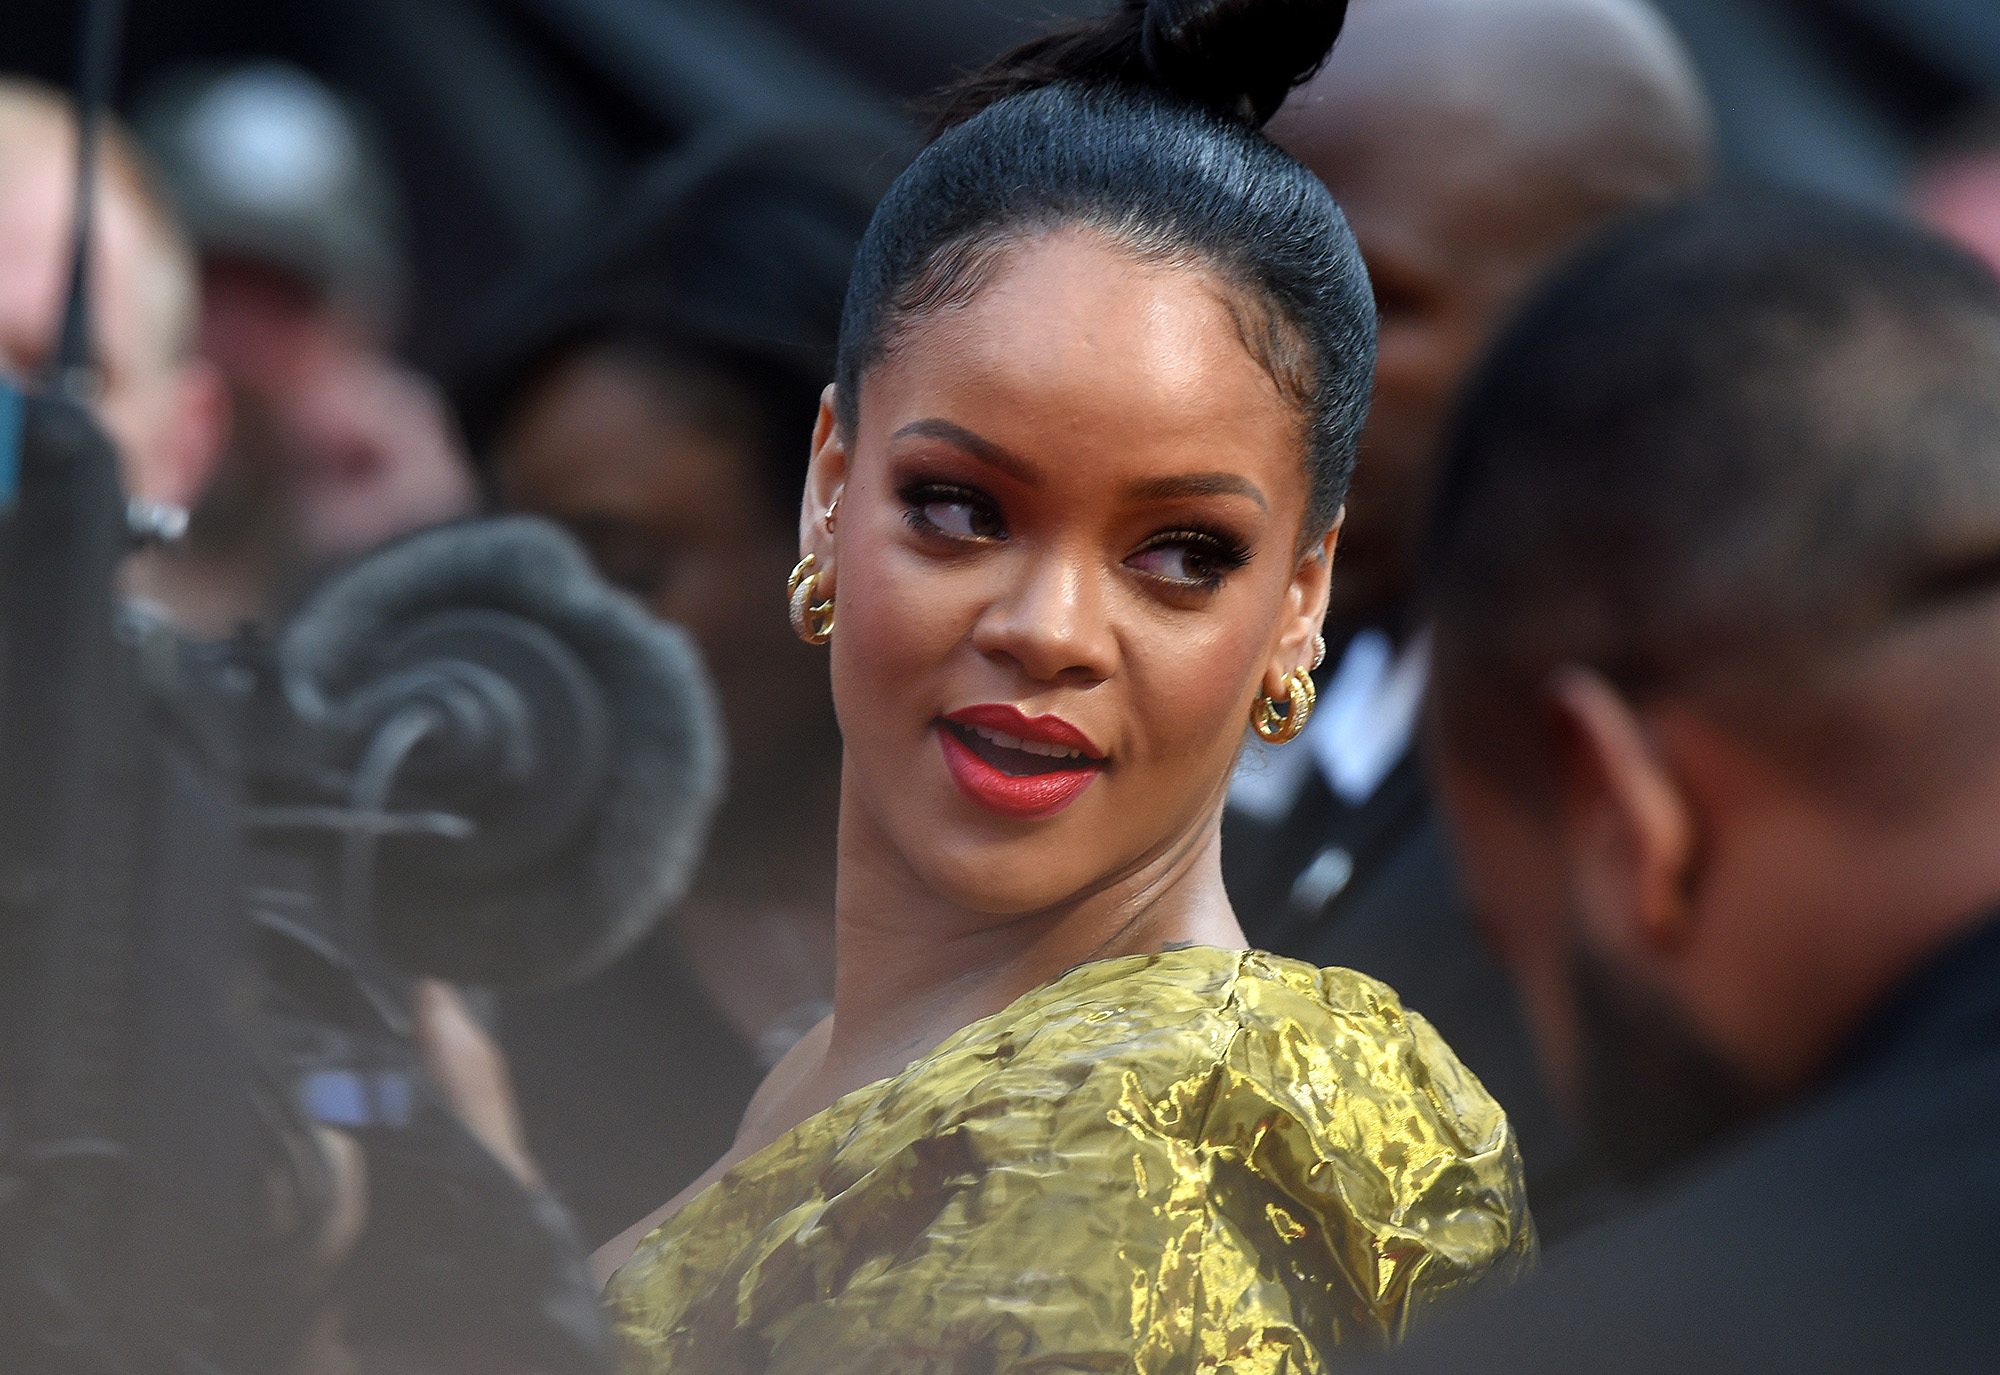 Rihanna Joins LVMH to Launch Fashion House Under Fenty Label - Bloomberg